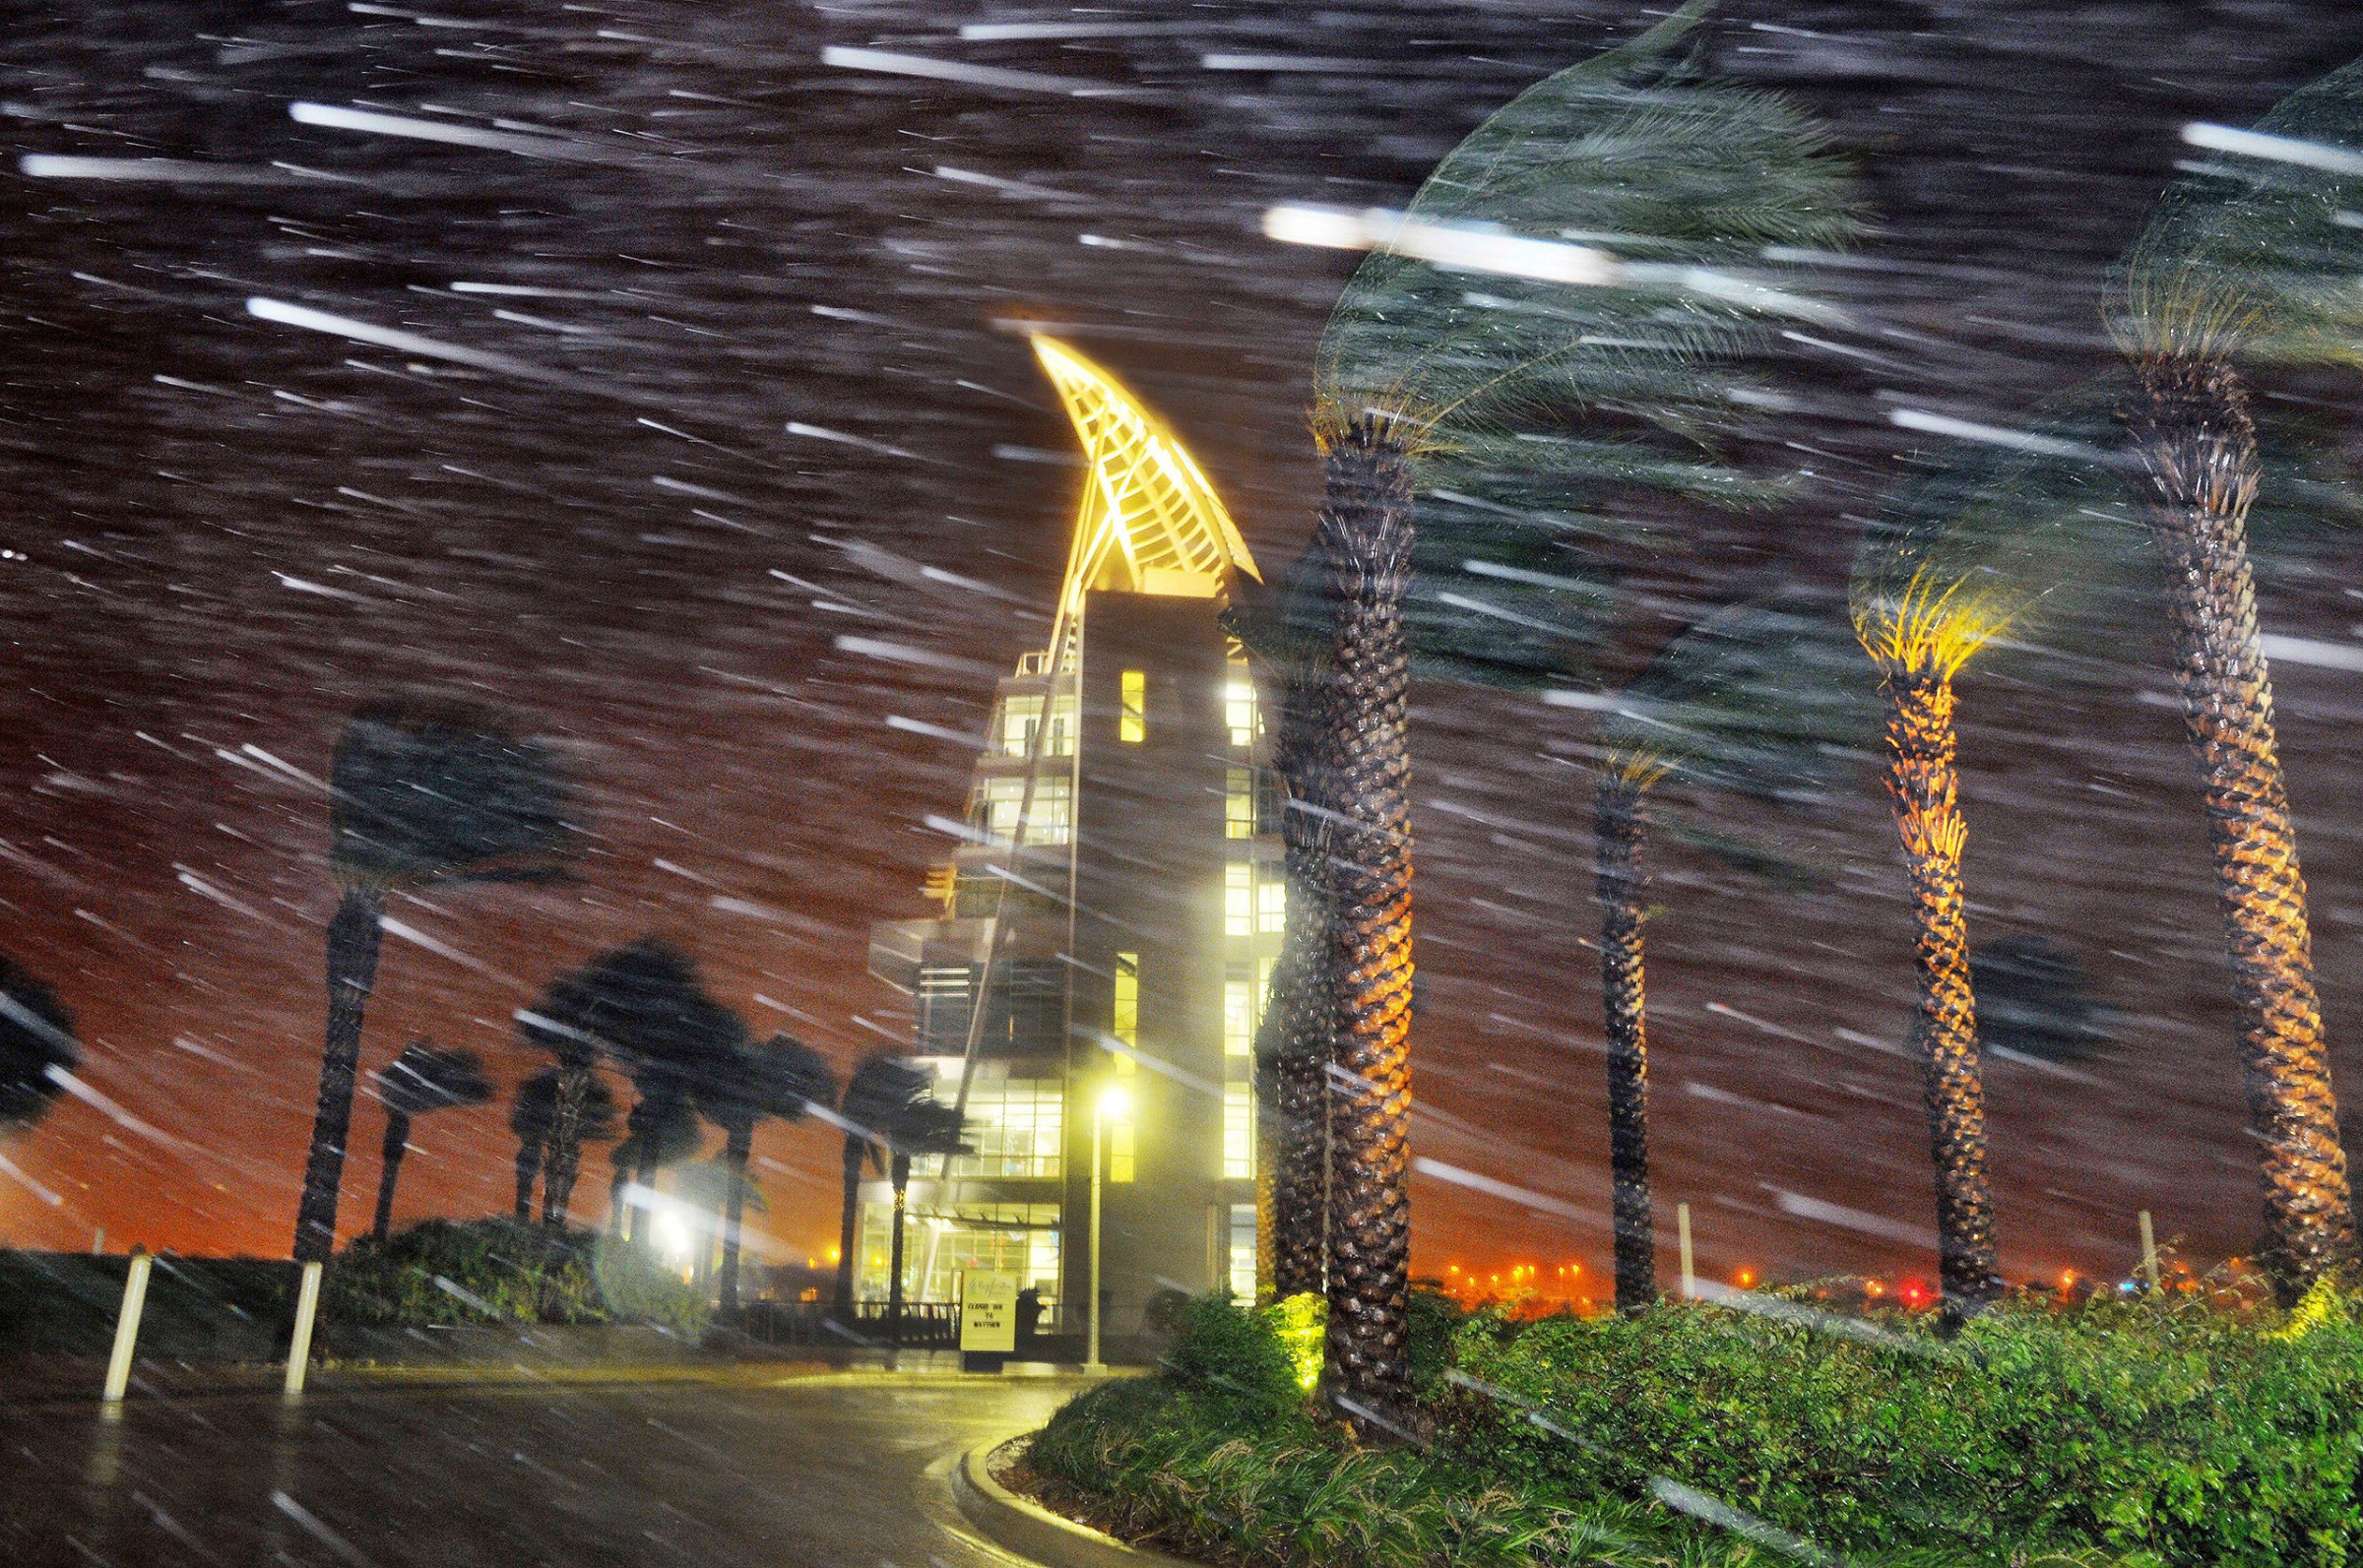 Trees sway from heavy rain and wind from Hurricane Matthew in front of Exploration Tower in Cape Canaveral, Fla., Oct. 7, 2016.